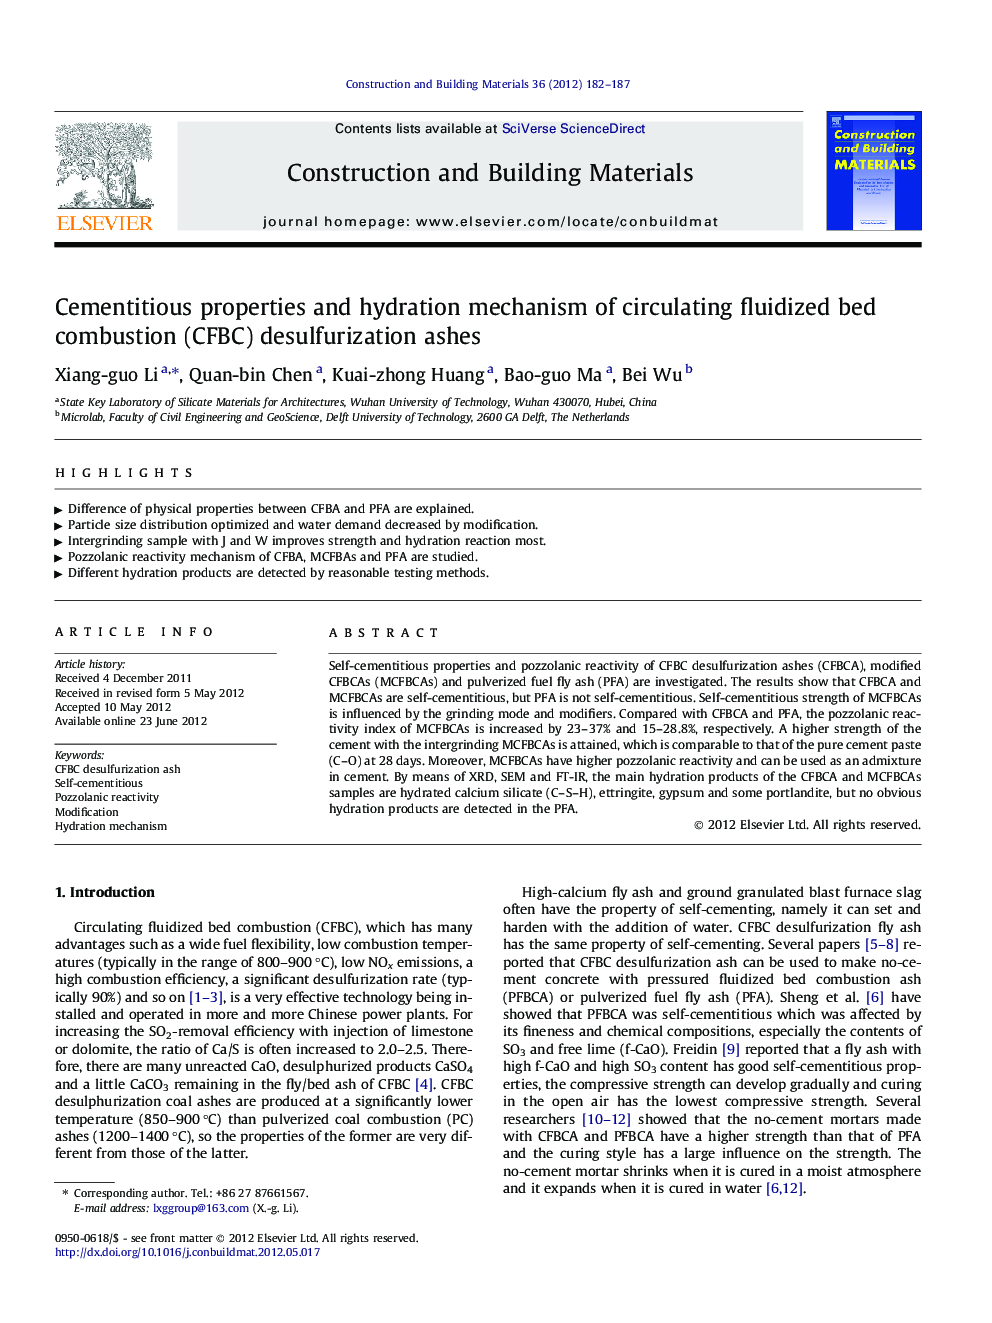 Cementitious properties and hydration mechanism of circulating fluidized bed combustion (CFBC) desulfurization ashes